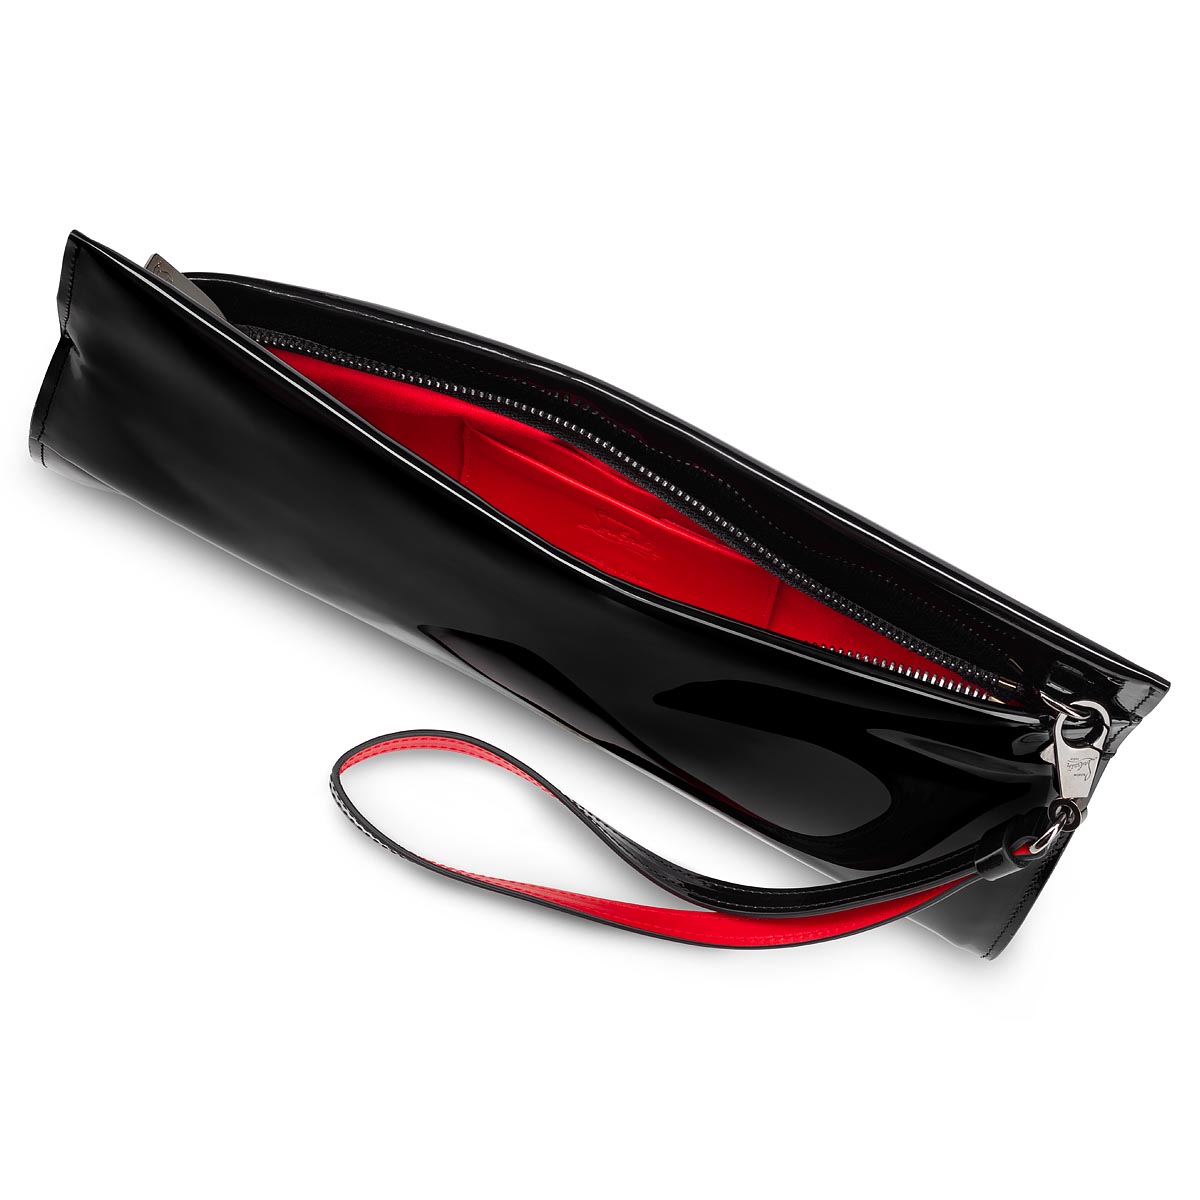 Leather clutch bag Christian Louboutin Black in Leather - 32449020